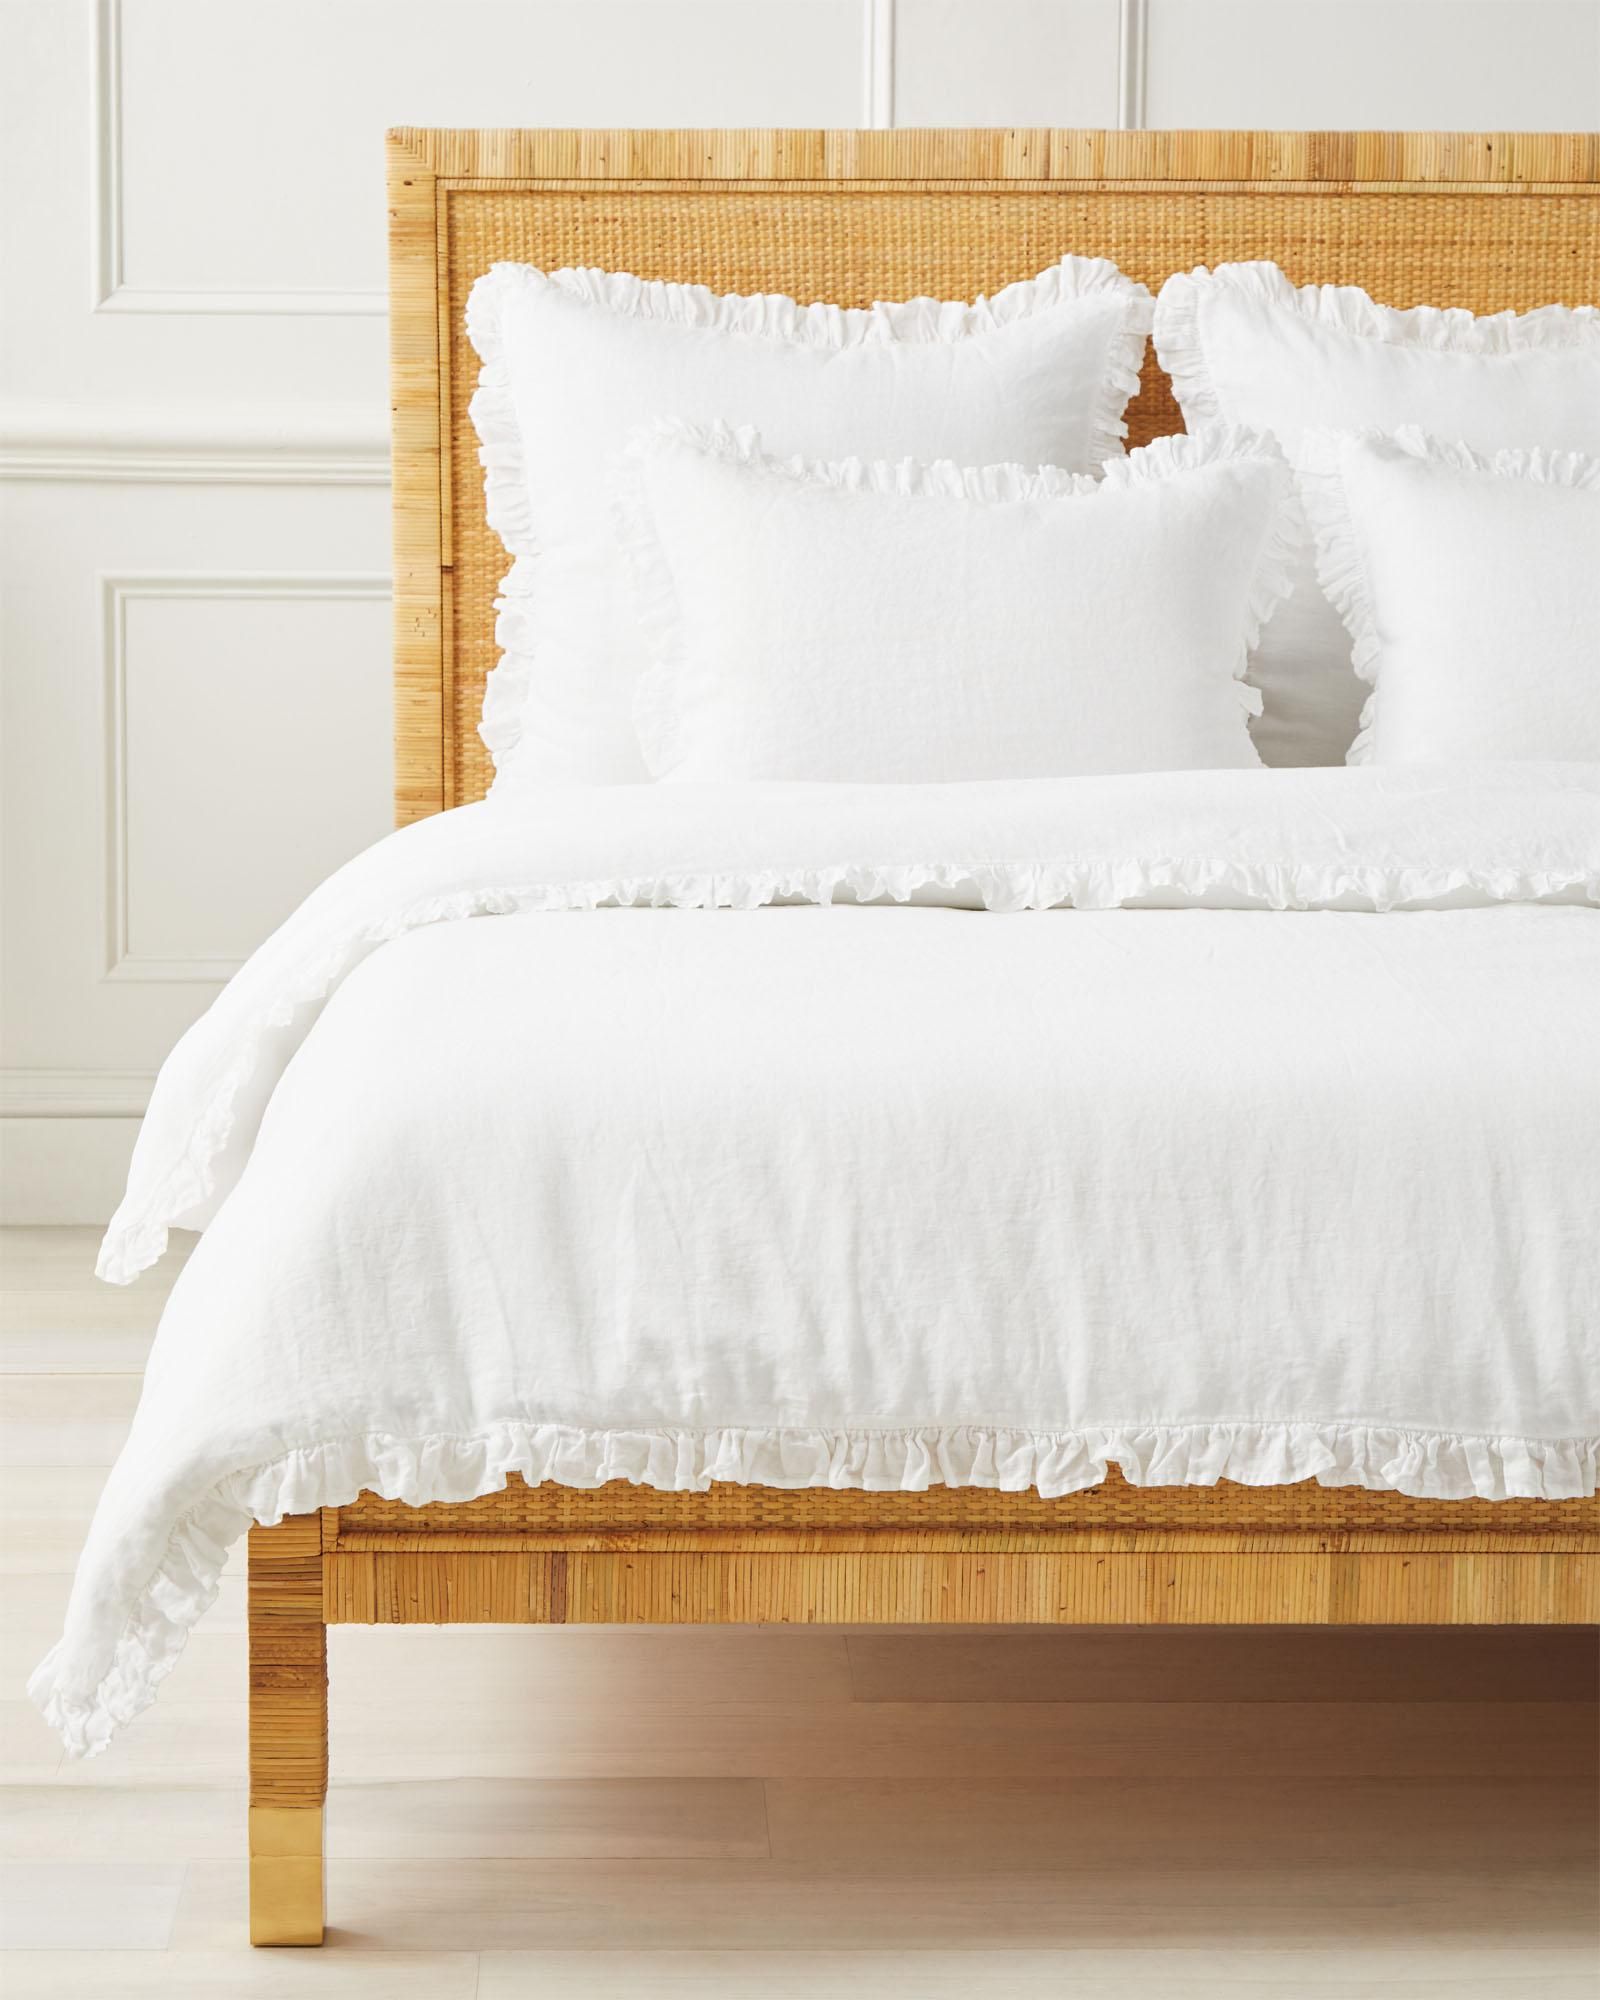 Nantucket Linen Duvet Cover | Serena and Lily